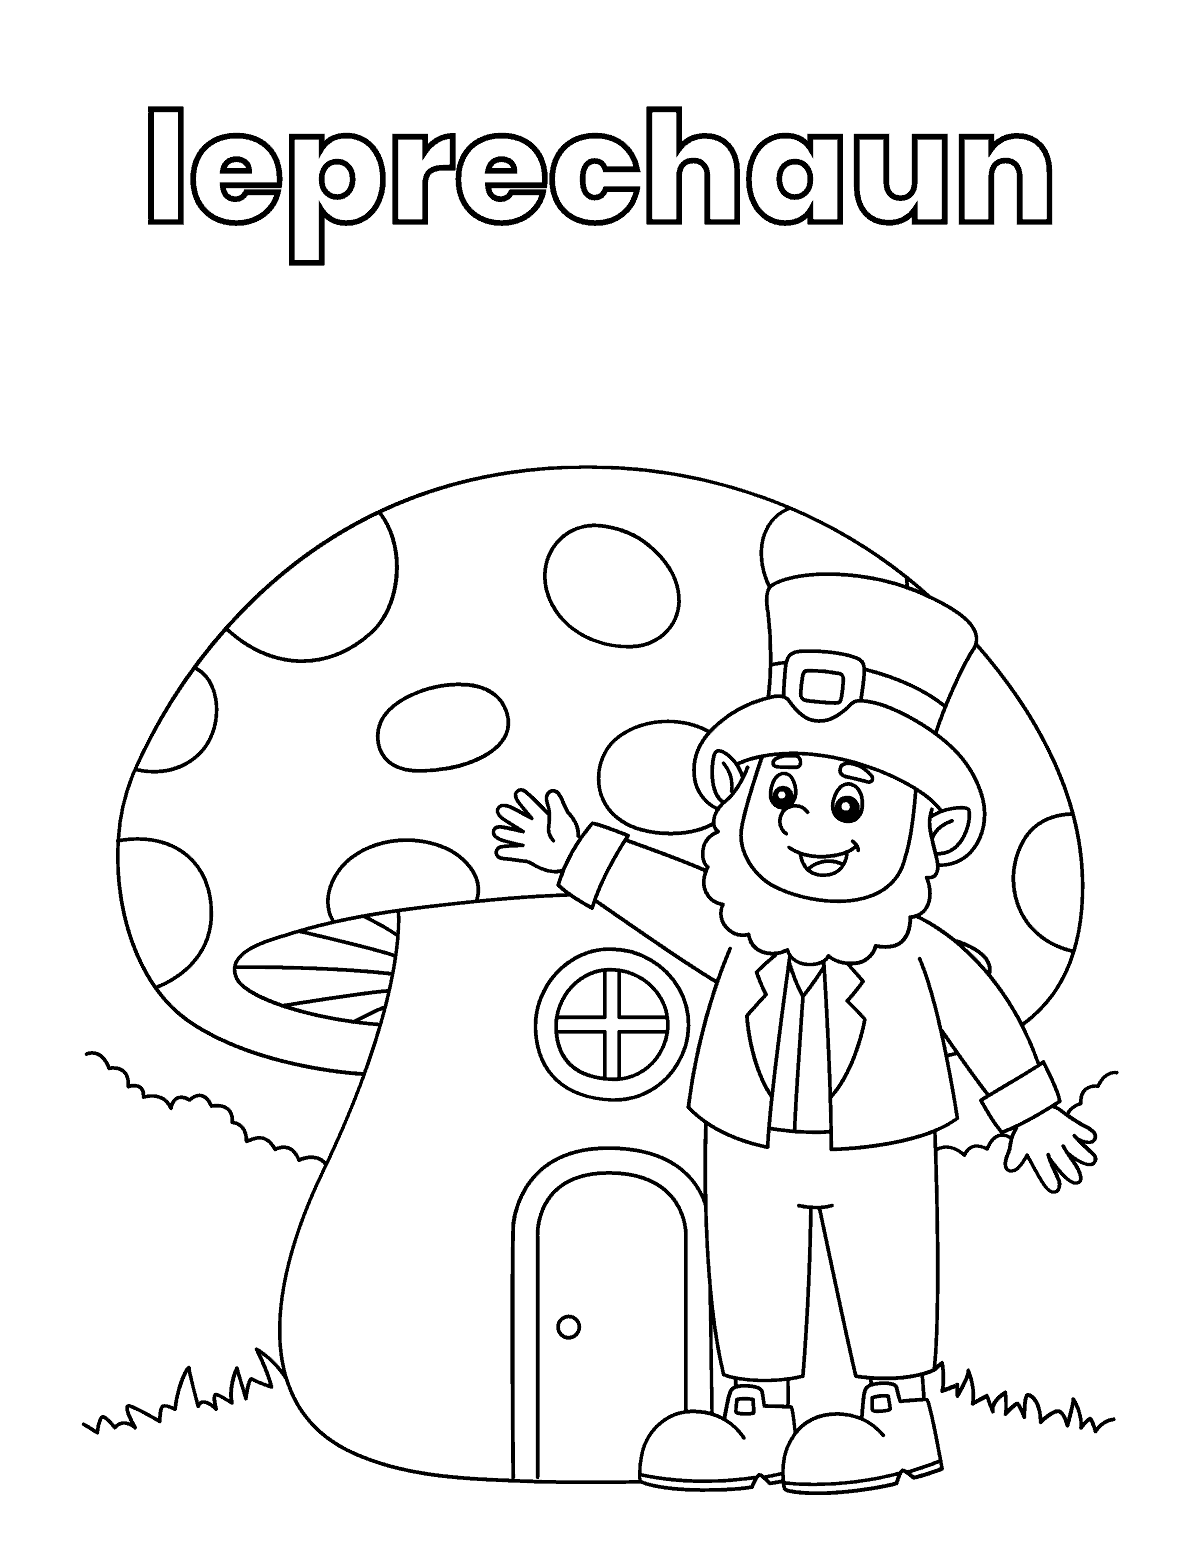 St. Paddy's Day Leprechaun with Mushroom House Coloring Page